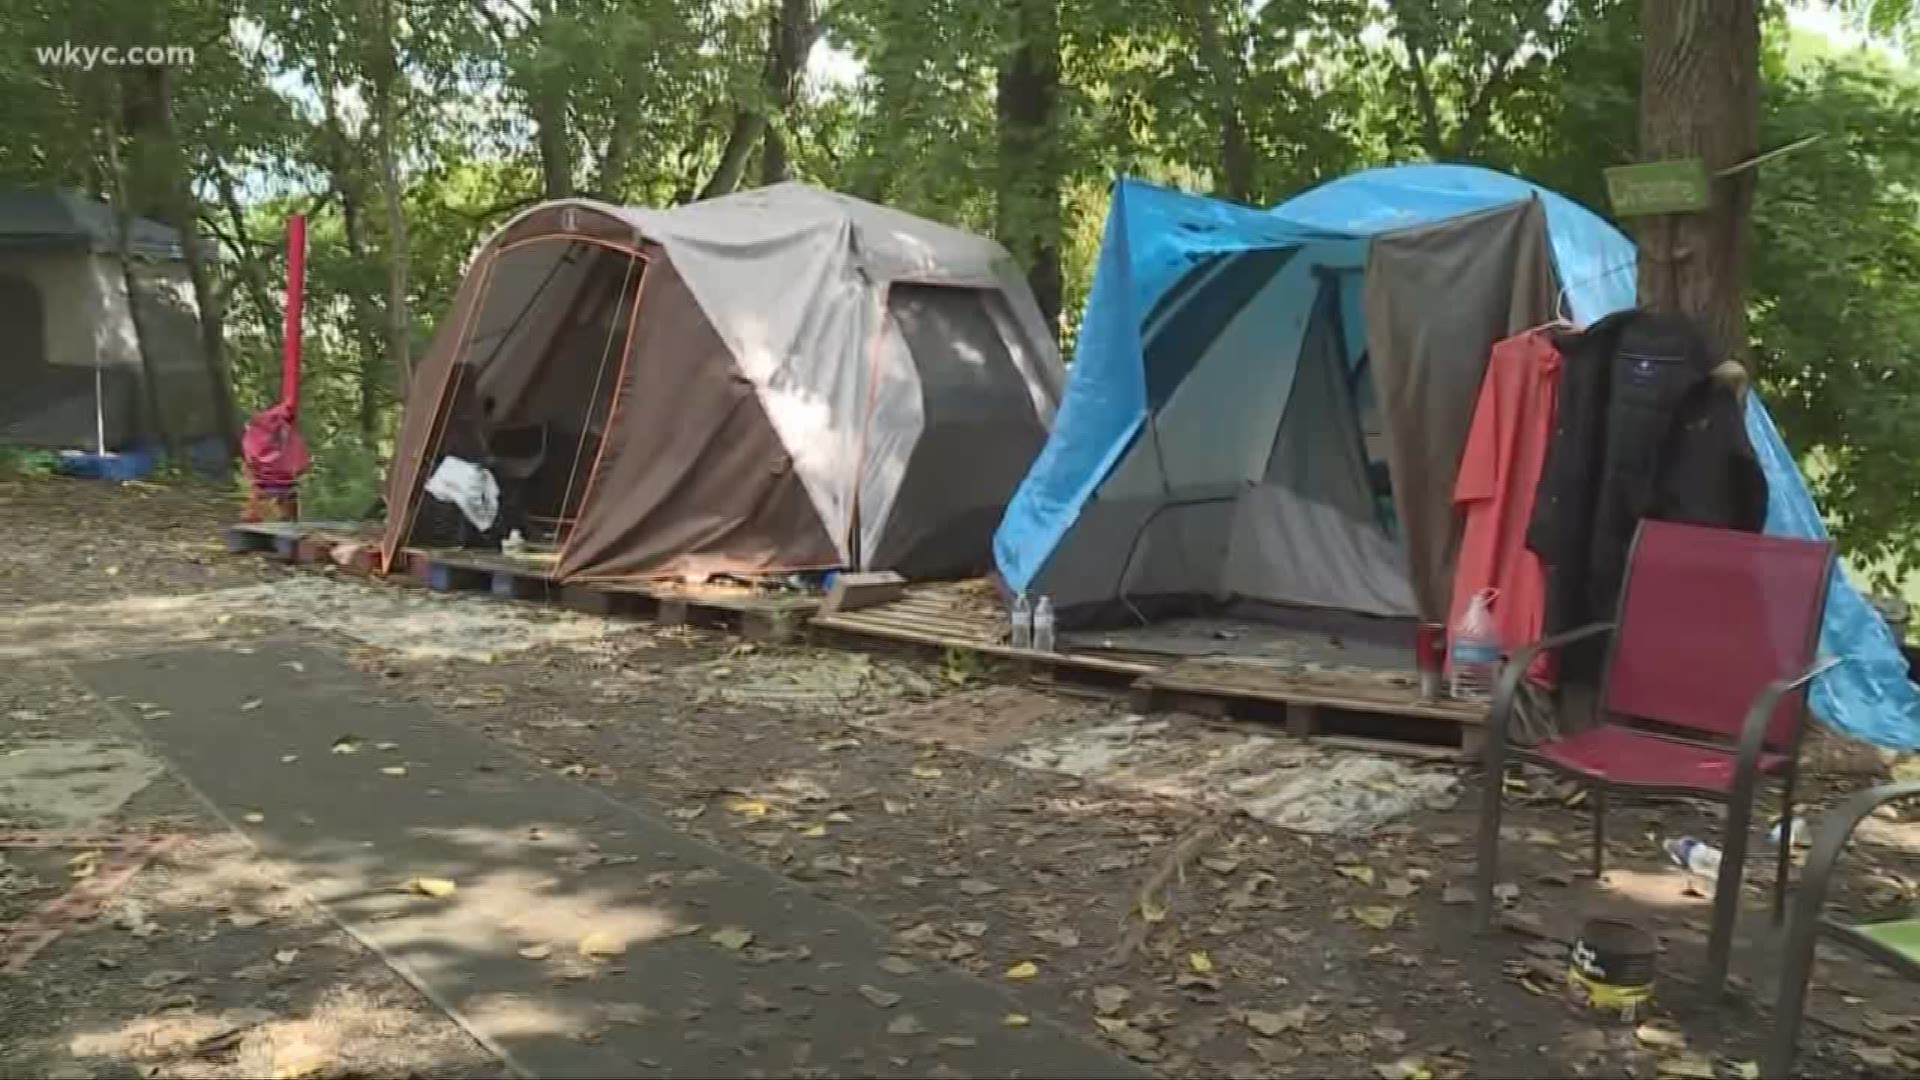 Akron's Tent City ordered to close by Thanksgiving